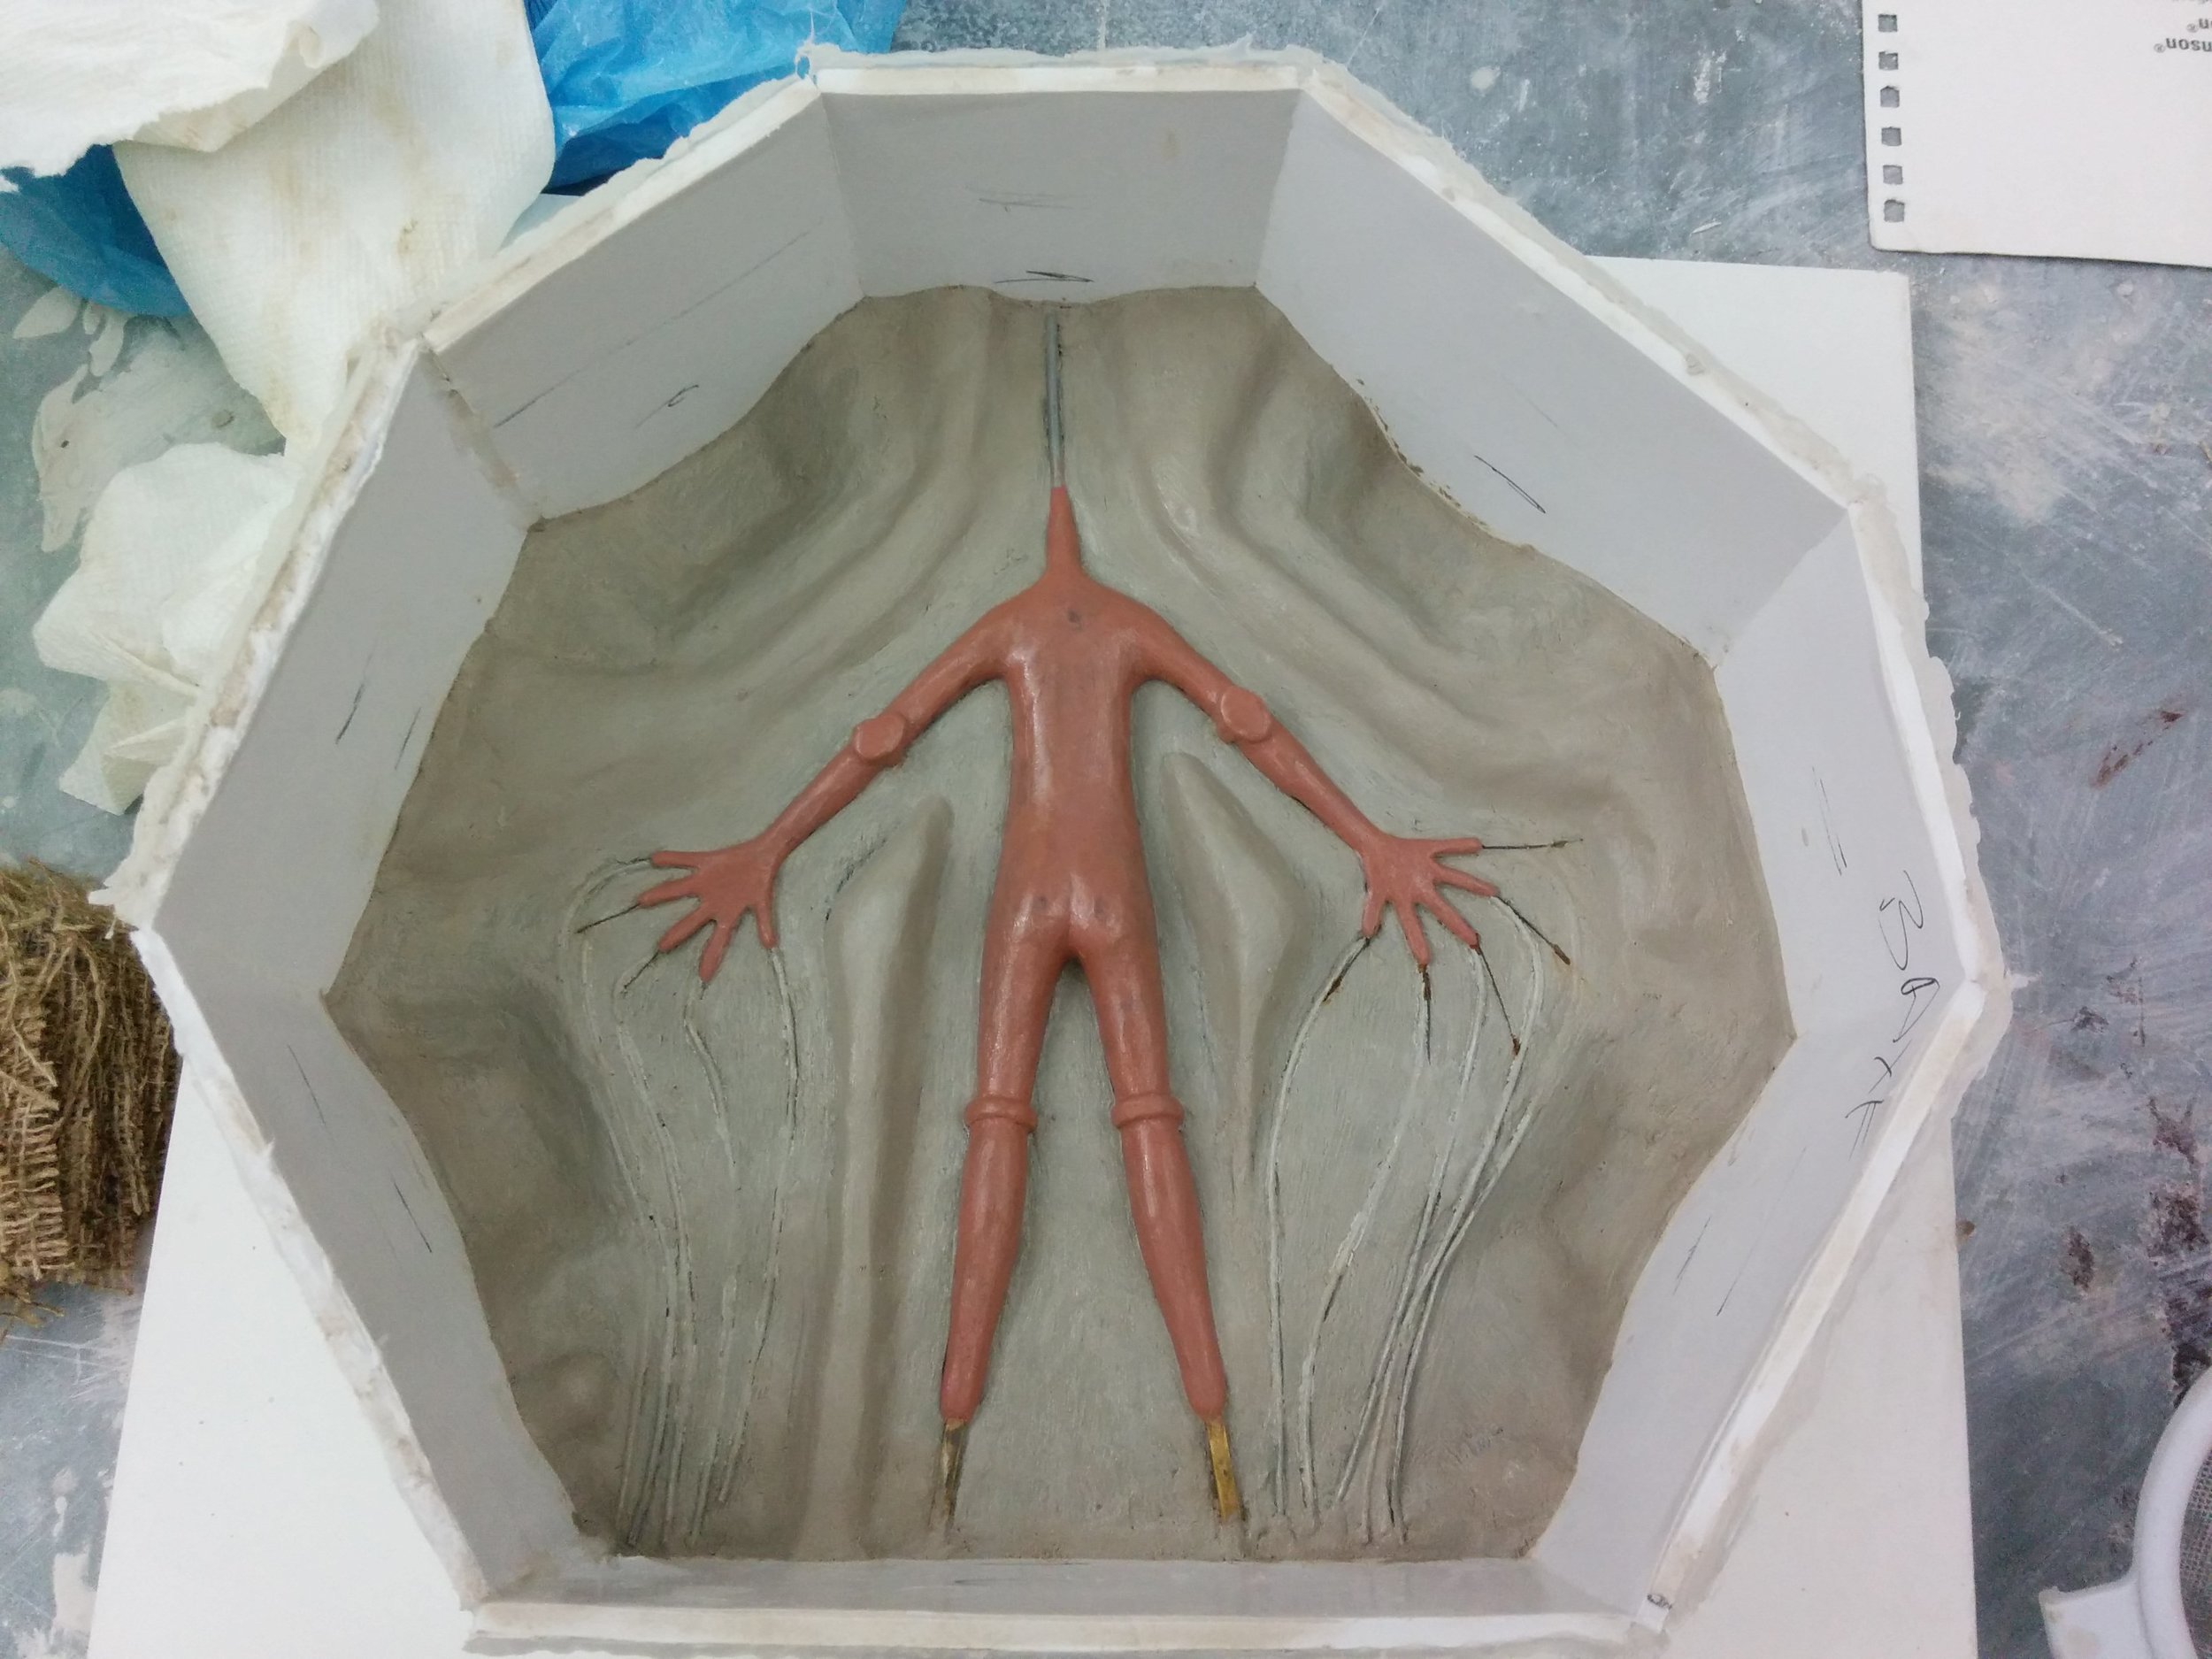  Body Plaster mold, prepped to pour the second half. Body sculpt done with Chavant clay.  